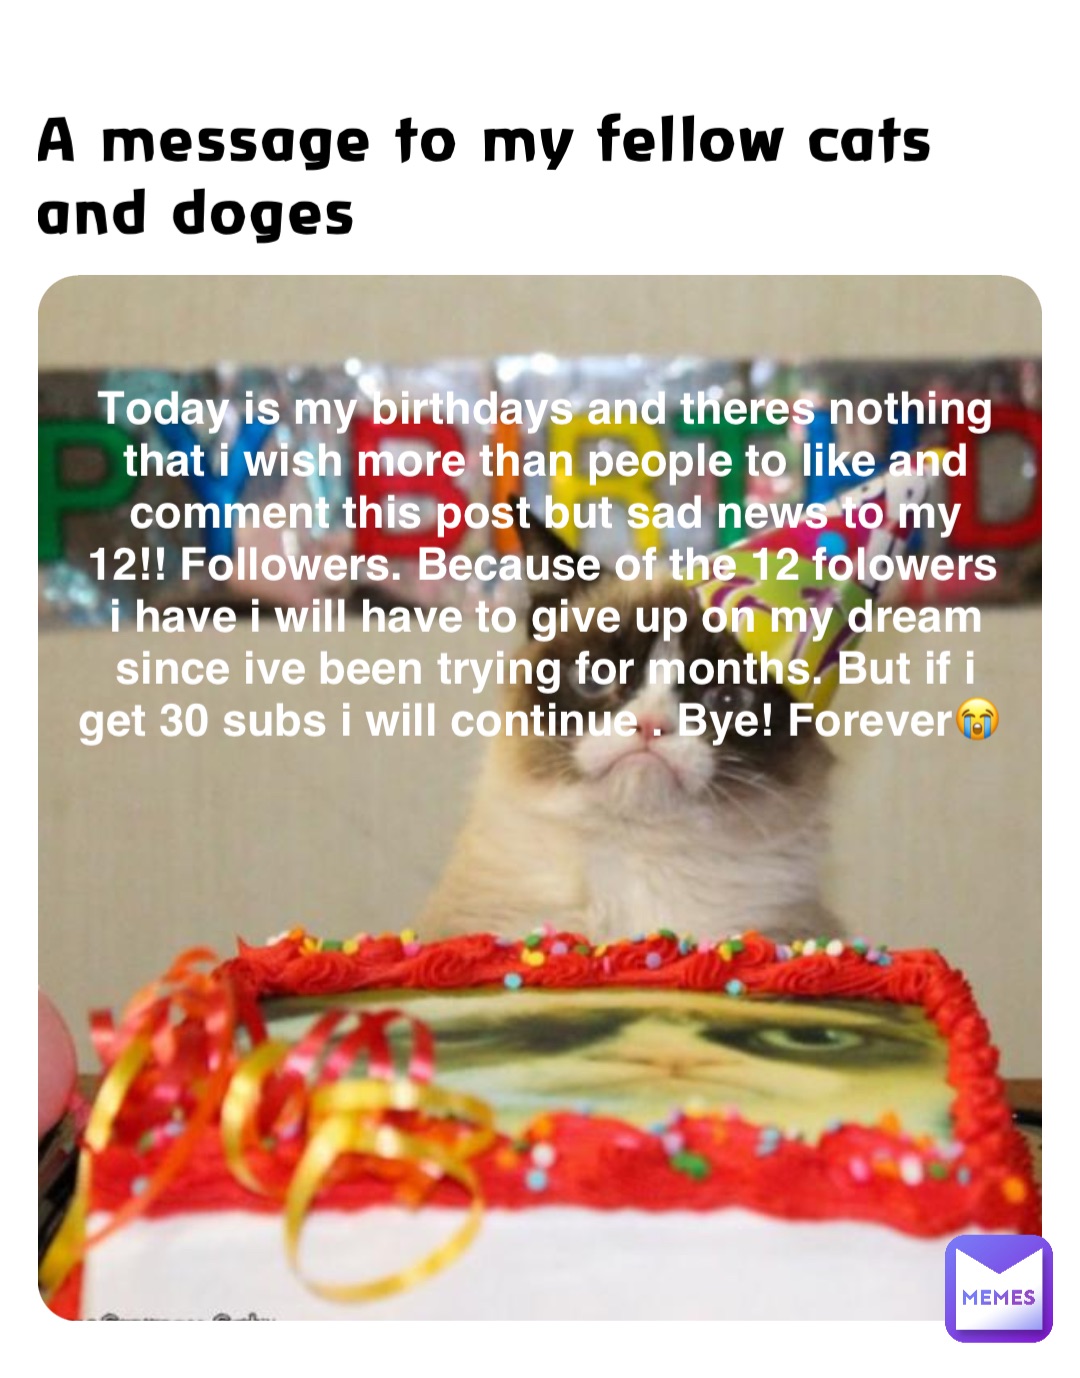 A message to my fellow cats and doges Today is my birthdays and theres nothing that i wish more than people to like and comment this post but sad news to my 12!! Followers. Because of the 12 folowers i have i will have to give up on my dream since ive been trying for months. But if i get 30 subs i will continue . Bye! Forever😭